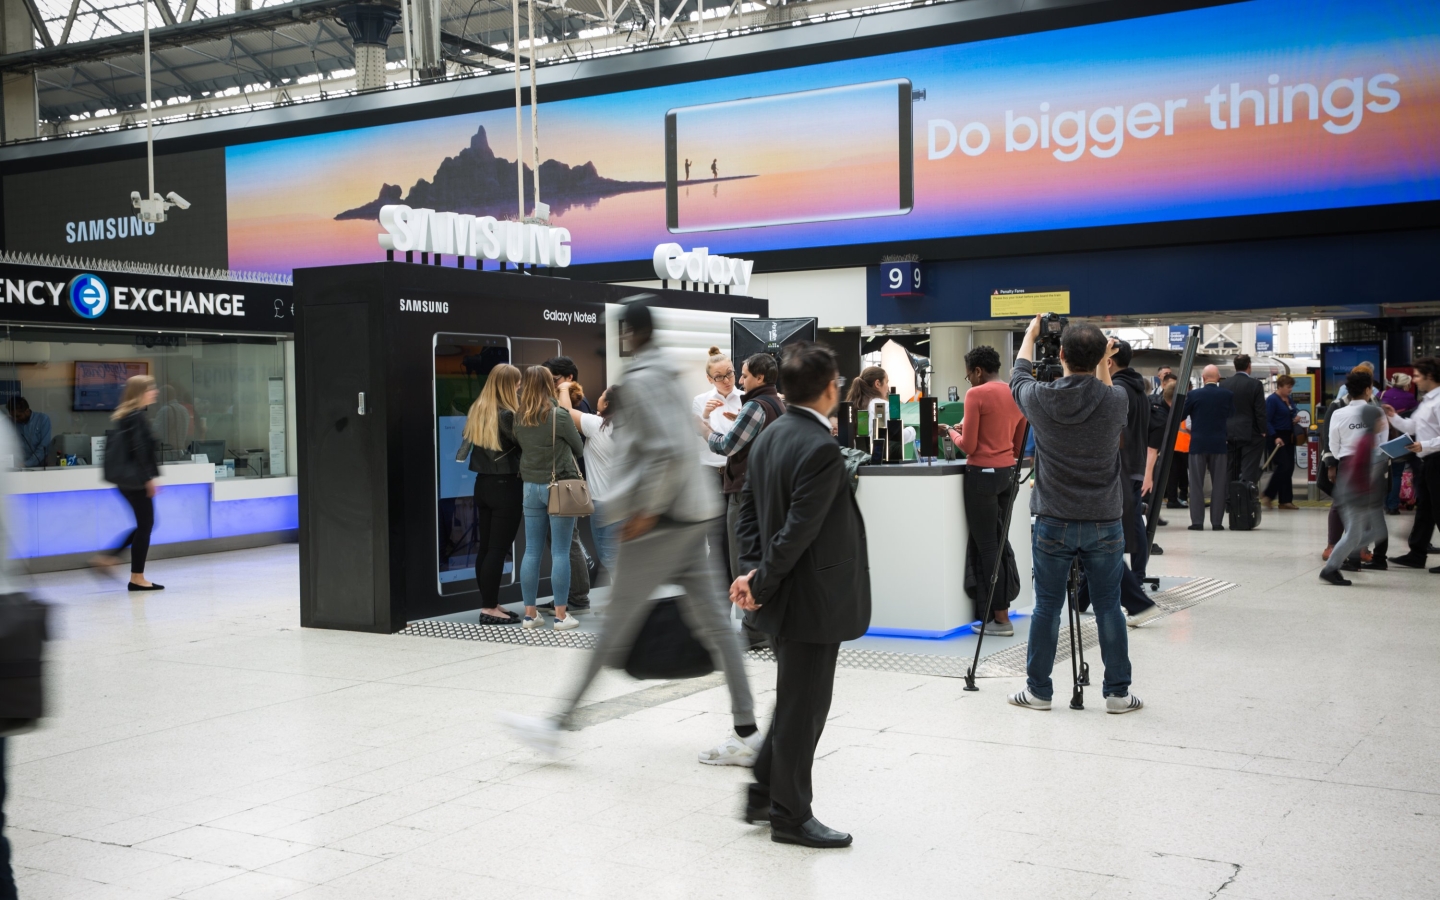 Smart Furniture: What it Means for Brands and for Audiences, JCDecaux Blog, Samsung domination campaign, Waterloo